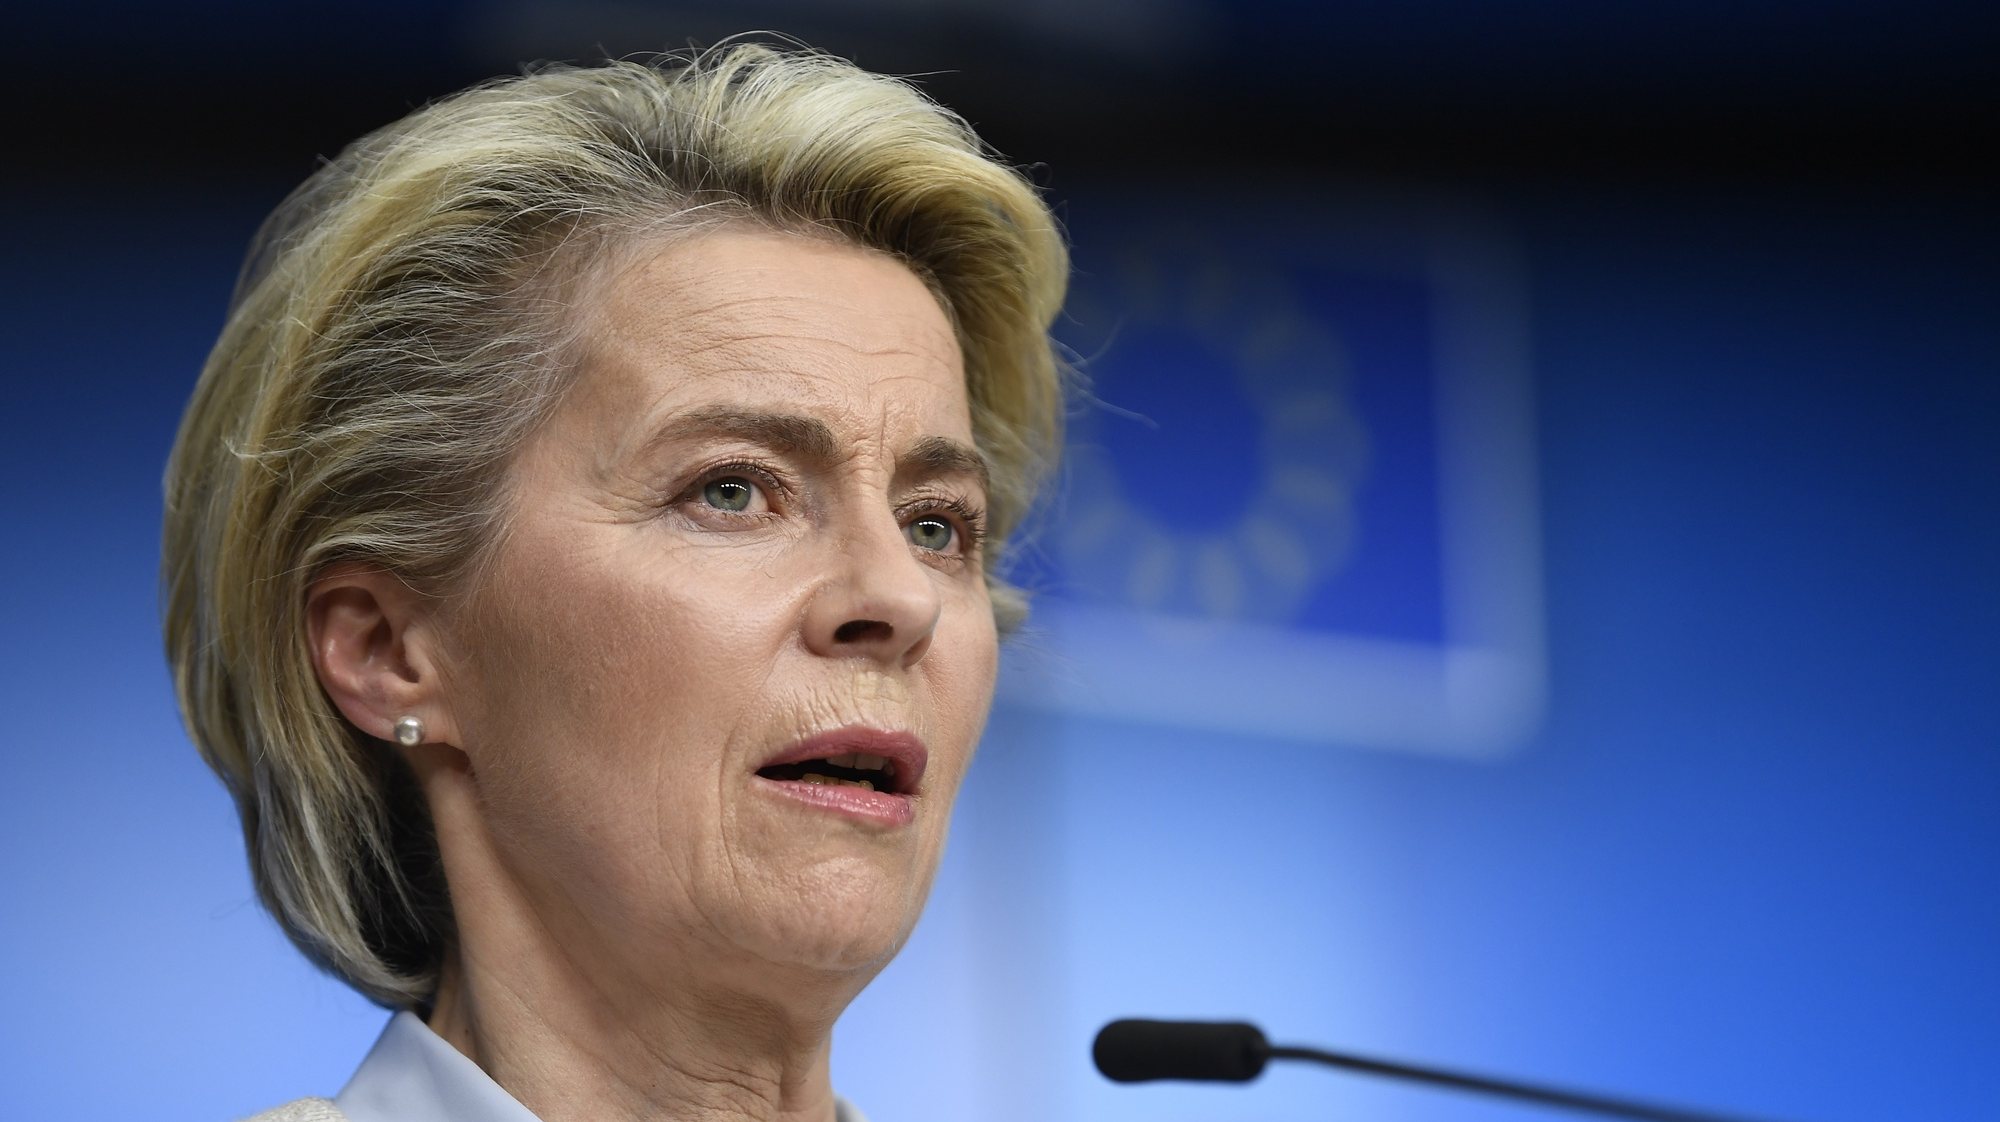 epa09225954 President of the European Commission Ursula von der Leyen speaks during a press conference at the EU summit at the European Council building in Brussels, Belgium, 24 May 2021. European Union leaders will take part in a two day in-person meeting to discuss the coronavirus pandemic, climate change and Russia.  EPA/JOHN THYS / POOL